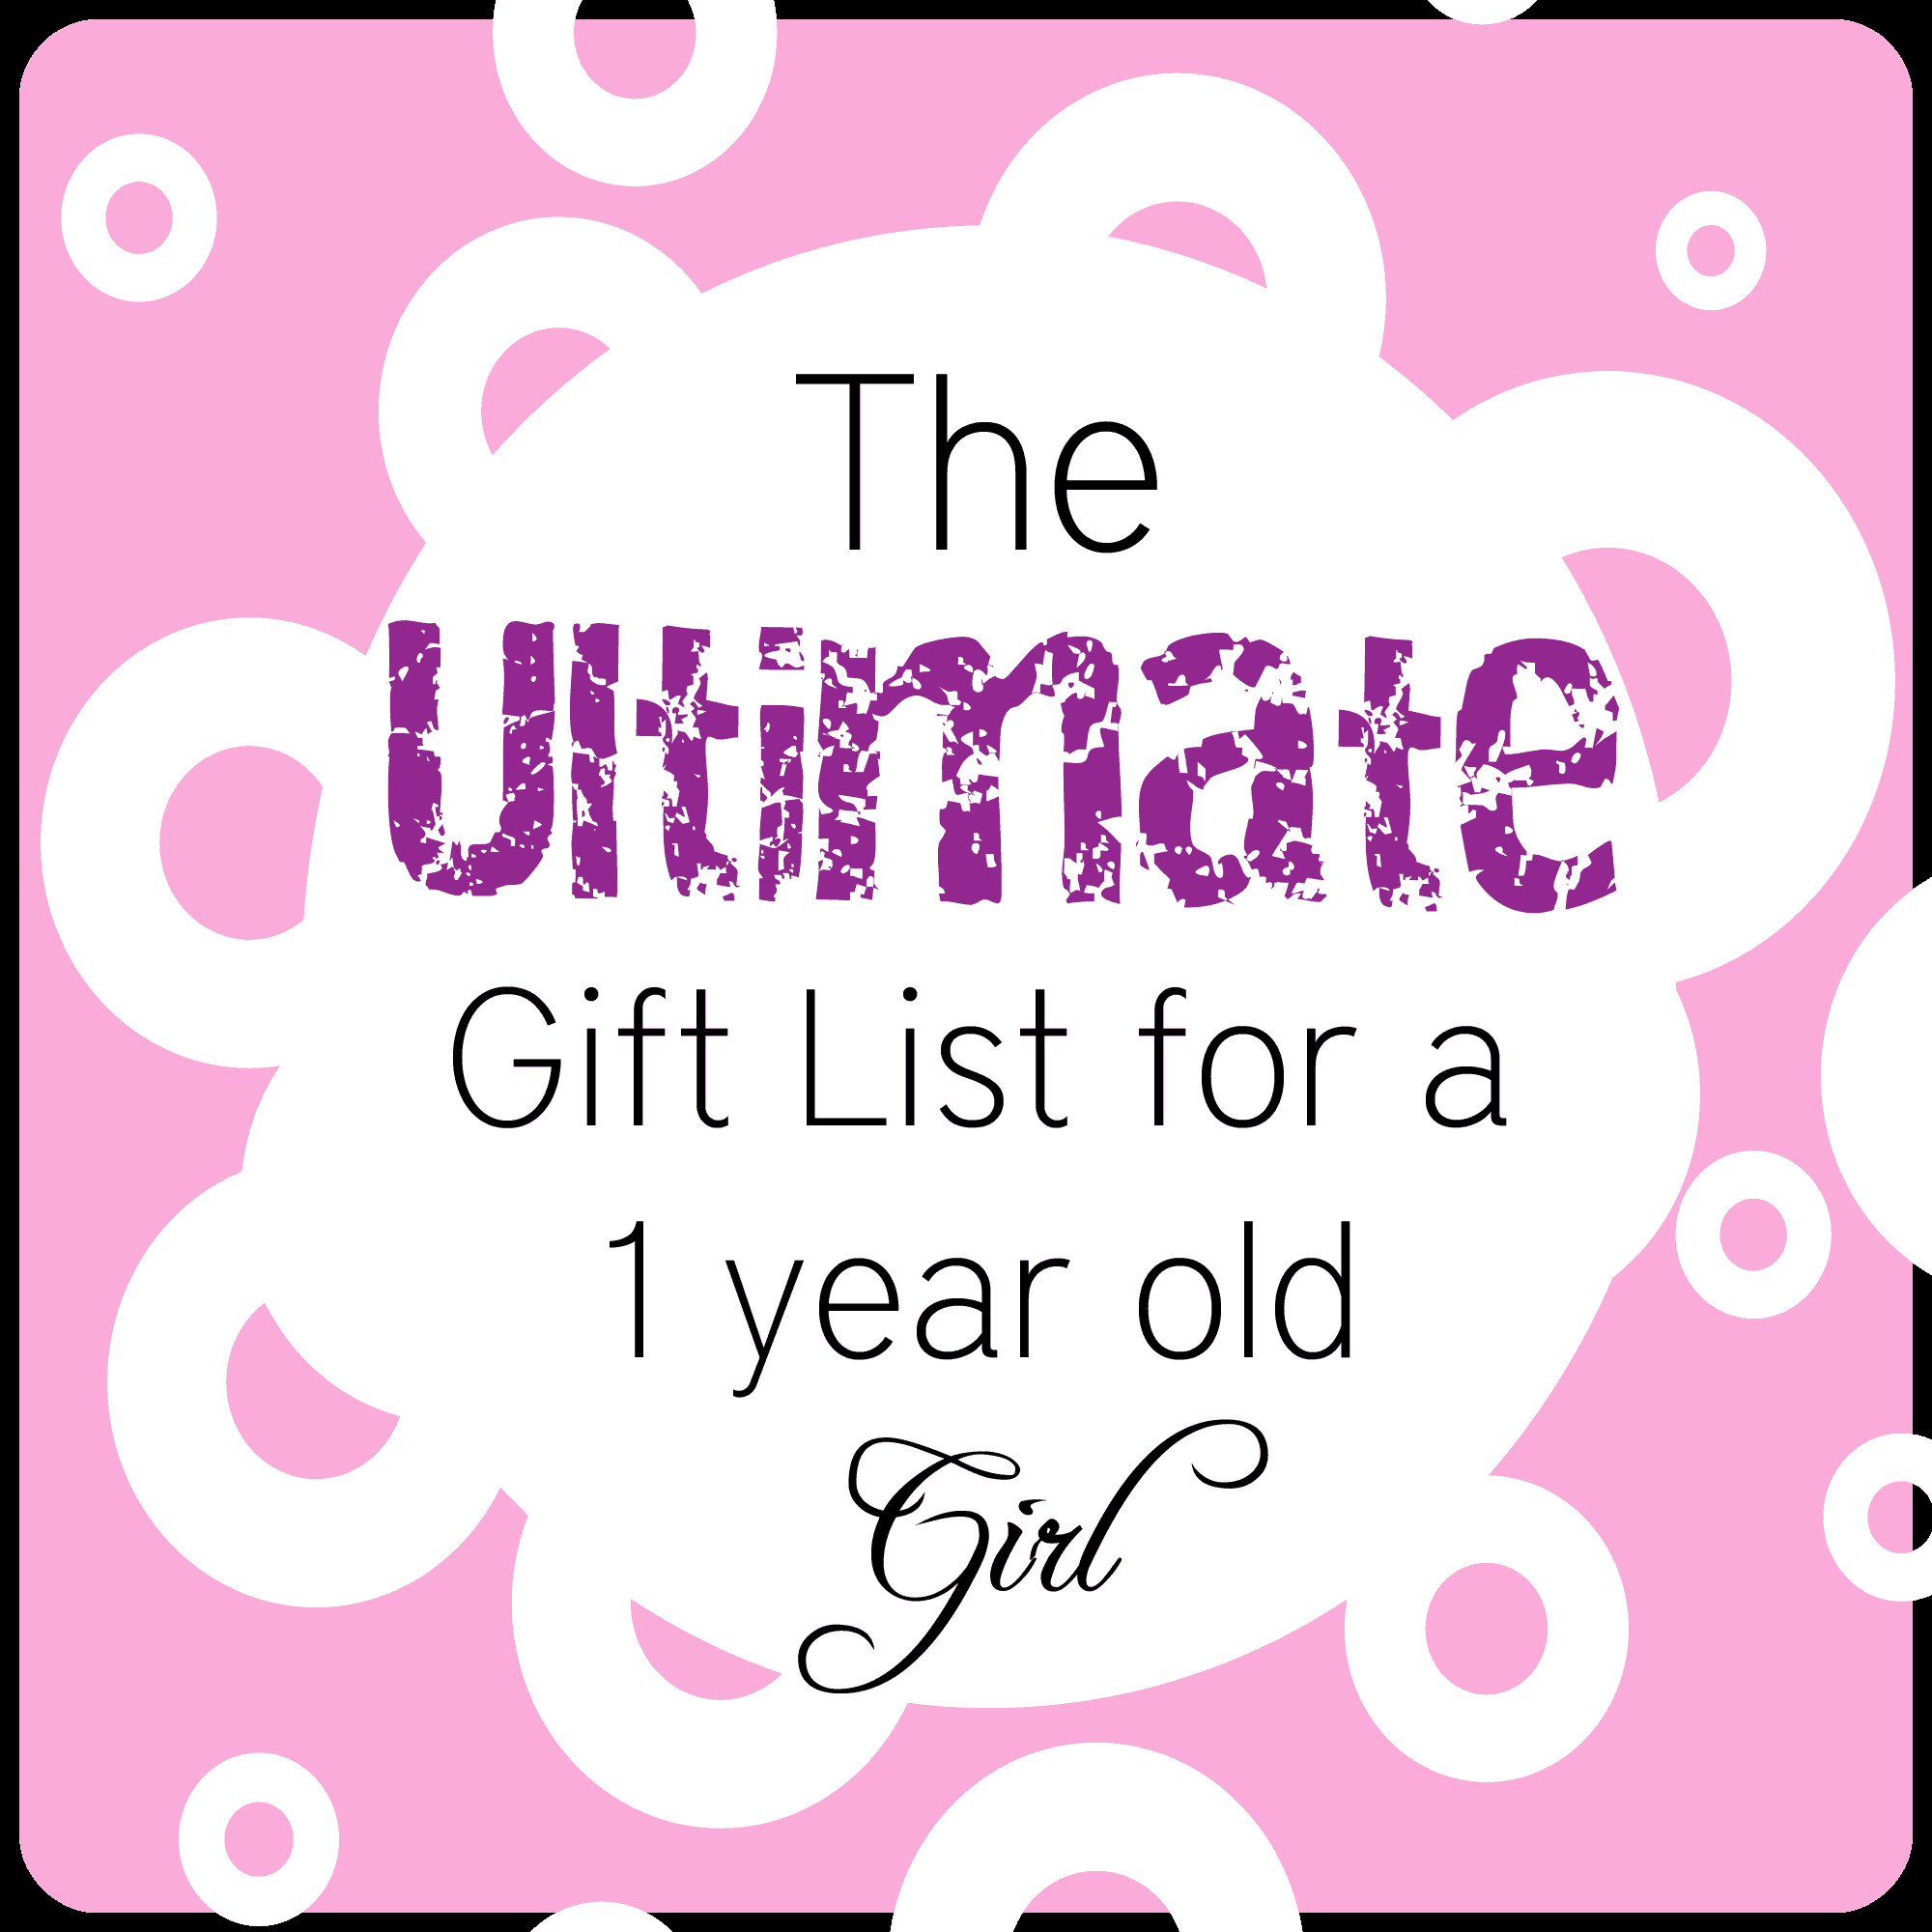 Baby Gifts 1 Year Old
 The Ultimate List of Gift Ideas for a 1 Year Old Girl